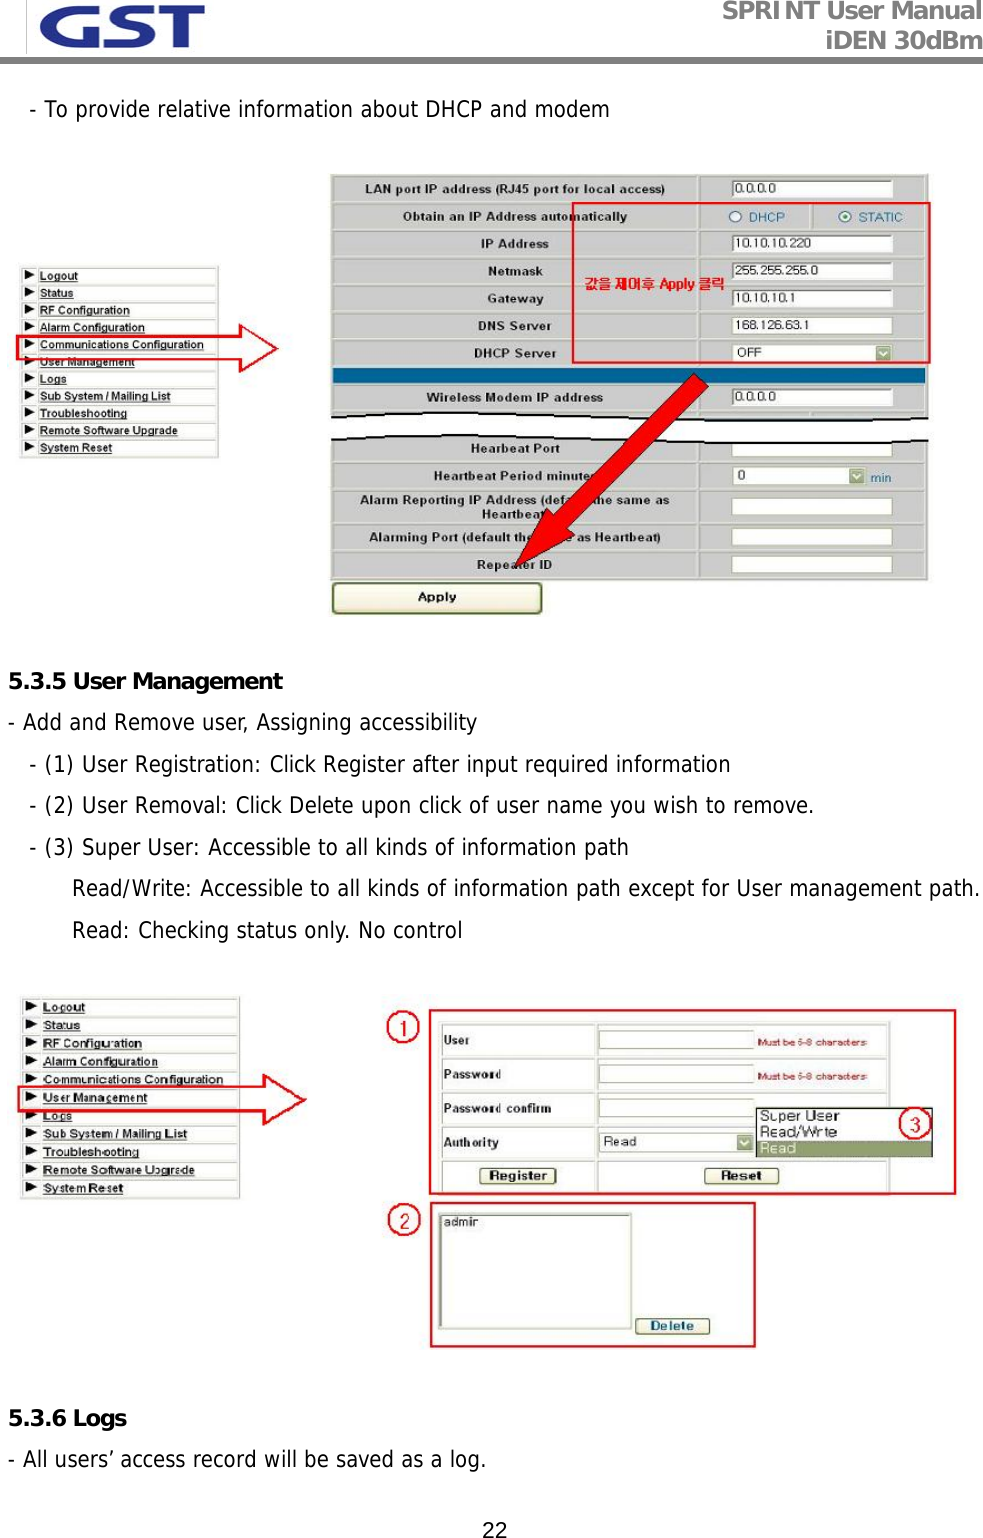 SPRINT User Manual iDEN 30dBm   22   - To provide relative information about DHCP and modem    5.3.5 User Management - Add and Remove user, Assigning accessibility     - (1) User Registration: Click Register after input required information     - (2) User Removal: Click Delete upon click of user name you wish to remove.     - (3) Super User: Accessible to all kinds of information path           Read/Write: Accessible to all kinds of information path except for User management path.          Read: Checking status only. No control     5.3.6 Logs - All users’ access record will be saved as a log.  